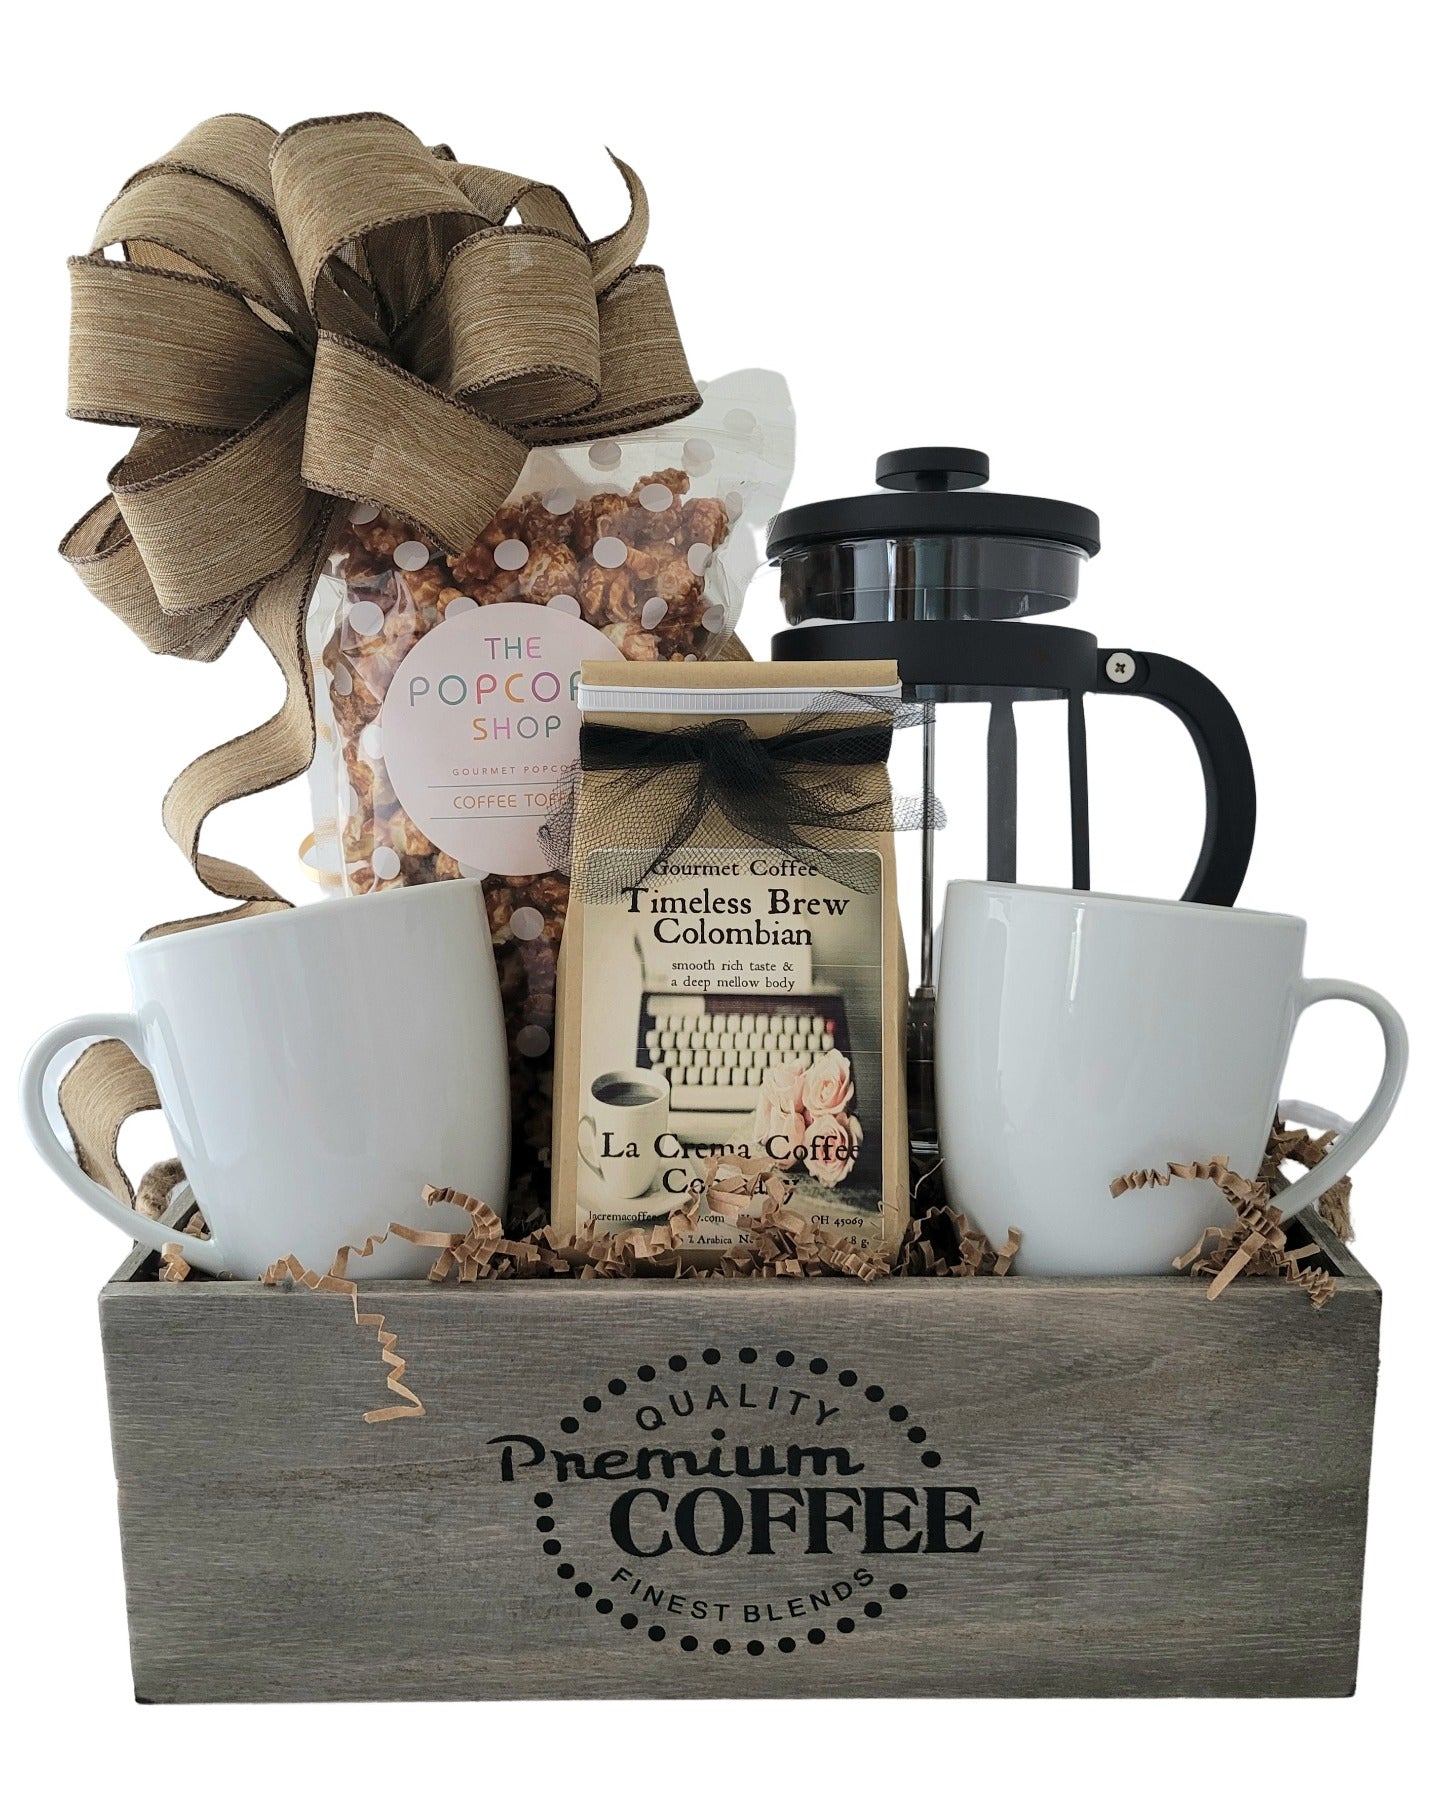 Give the Gift of Coffee | Coffee lover gifts basket, Homemade gift baskets,  Christmas gift baskets